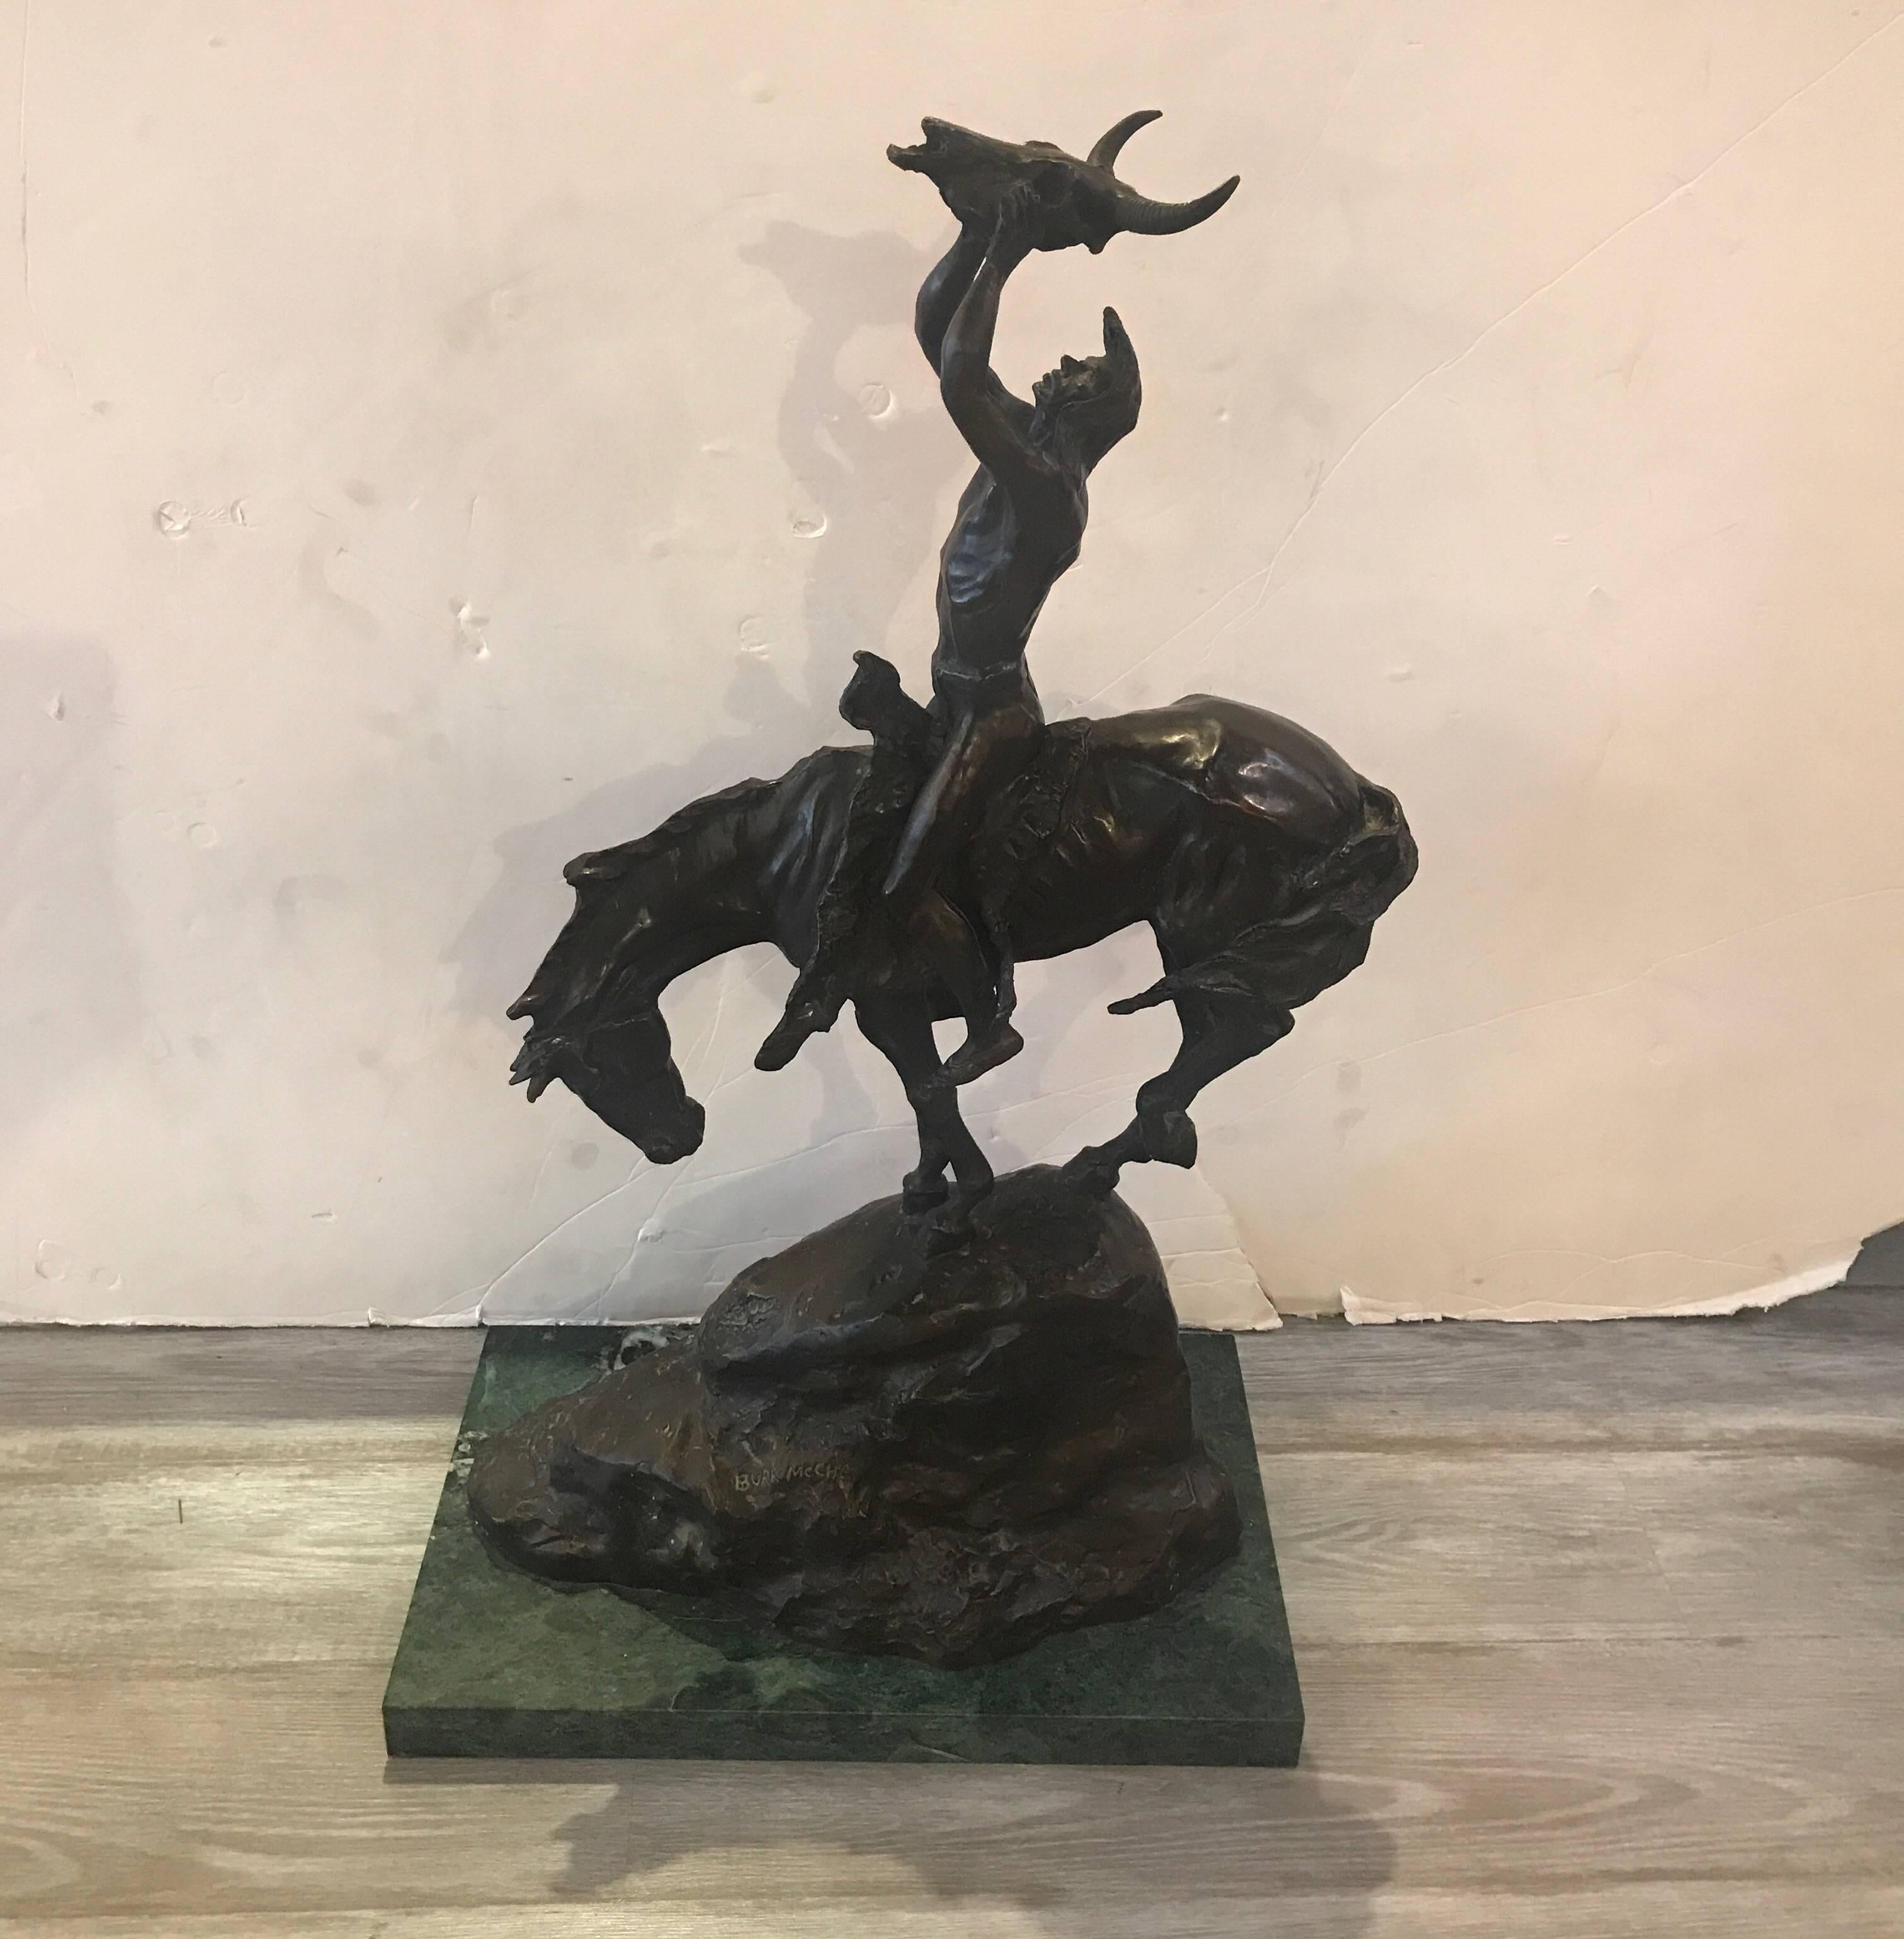 Cast bronze sculpture titles prayer to the healing spirit. This is a 20th century artist, Burk McCain who is known for western style bronze sculptures similar in style to Remington. Signed on base of bronze, the bronze has an attached dark green